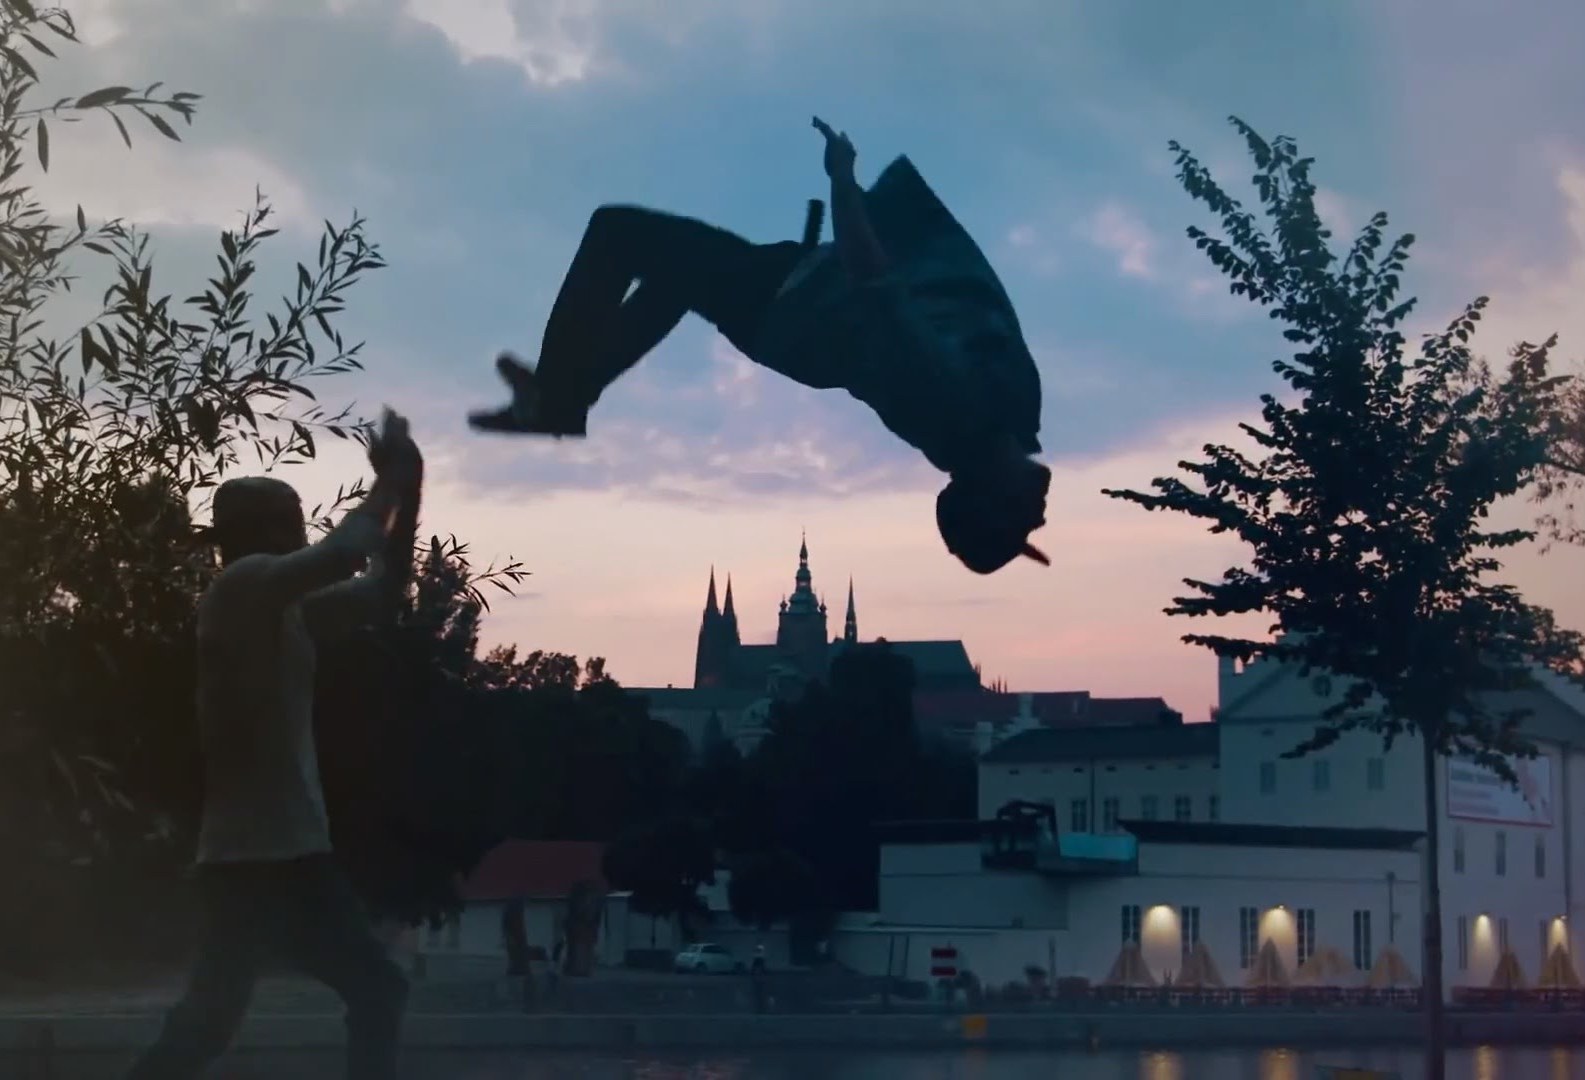 Dance movie: "Welcome to Prague!" and travel videos